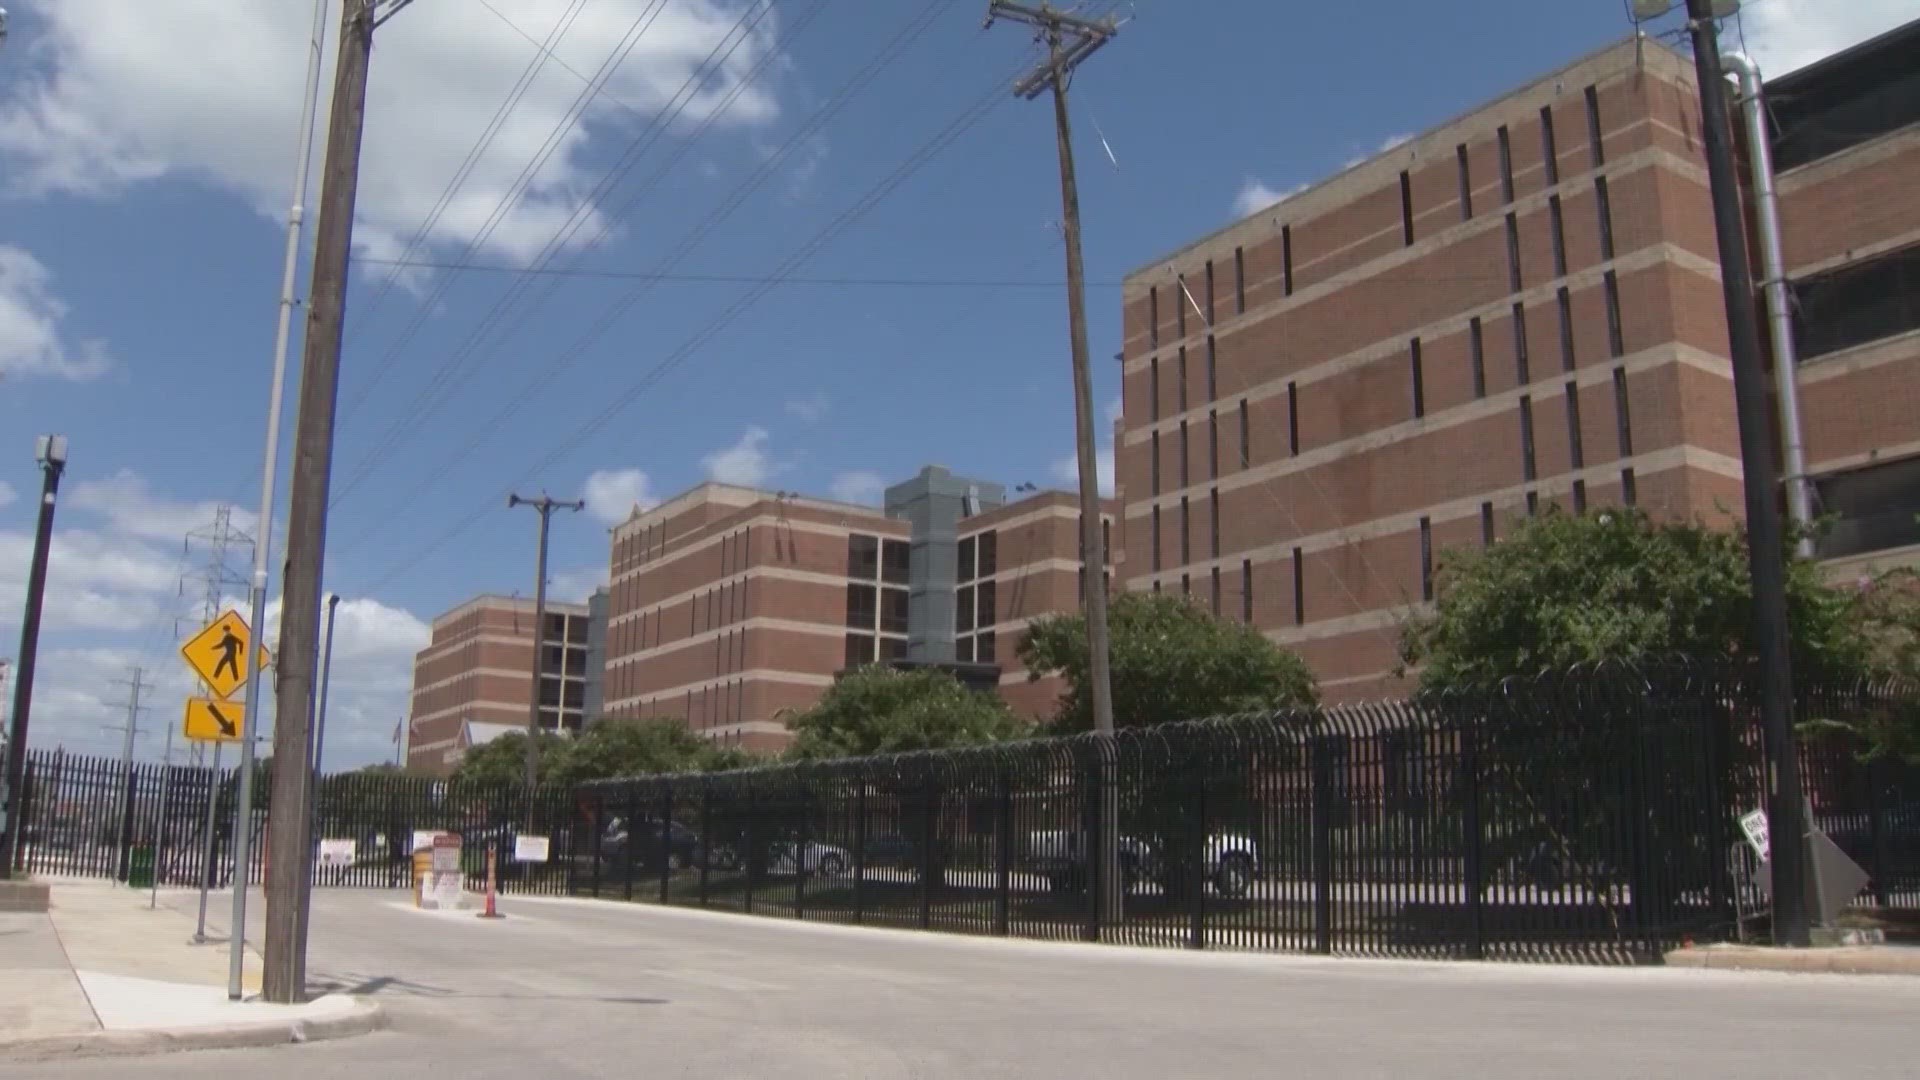 The Bexar County Sheriffs Office is paying for more than 500 hours of overtime every day due to staffing shortage.